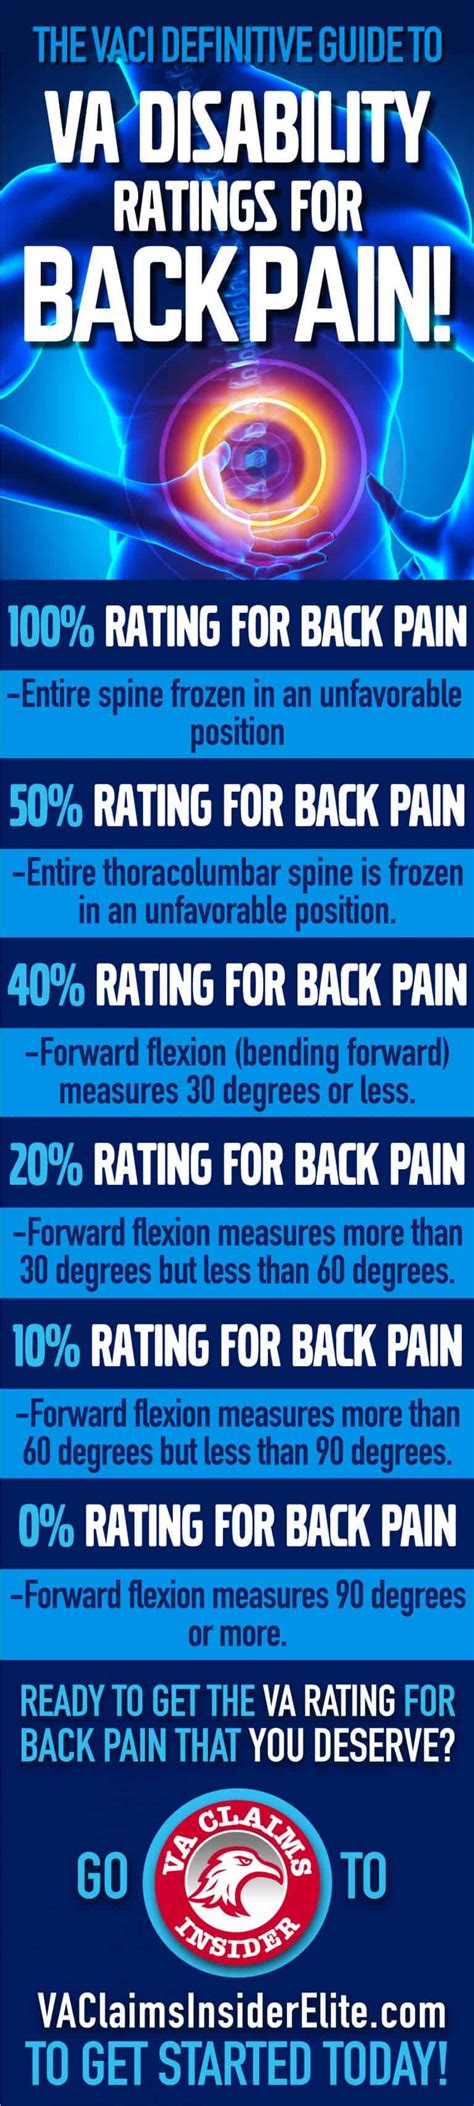 Va Disability Ratings For Back Pain Explained The Definitive Guide